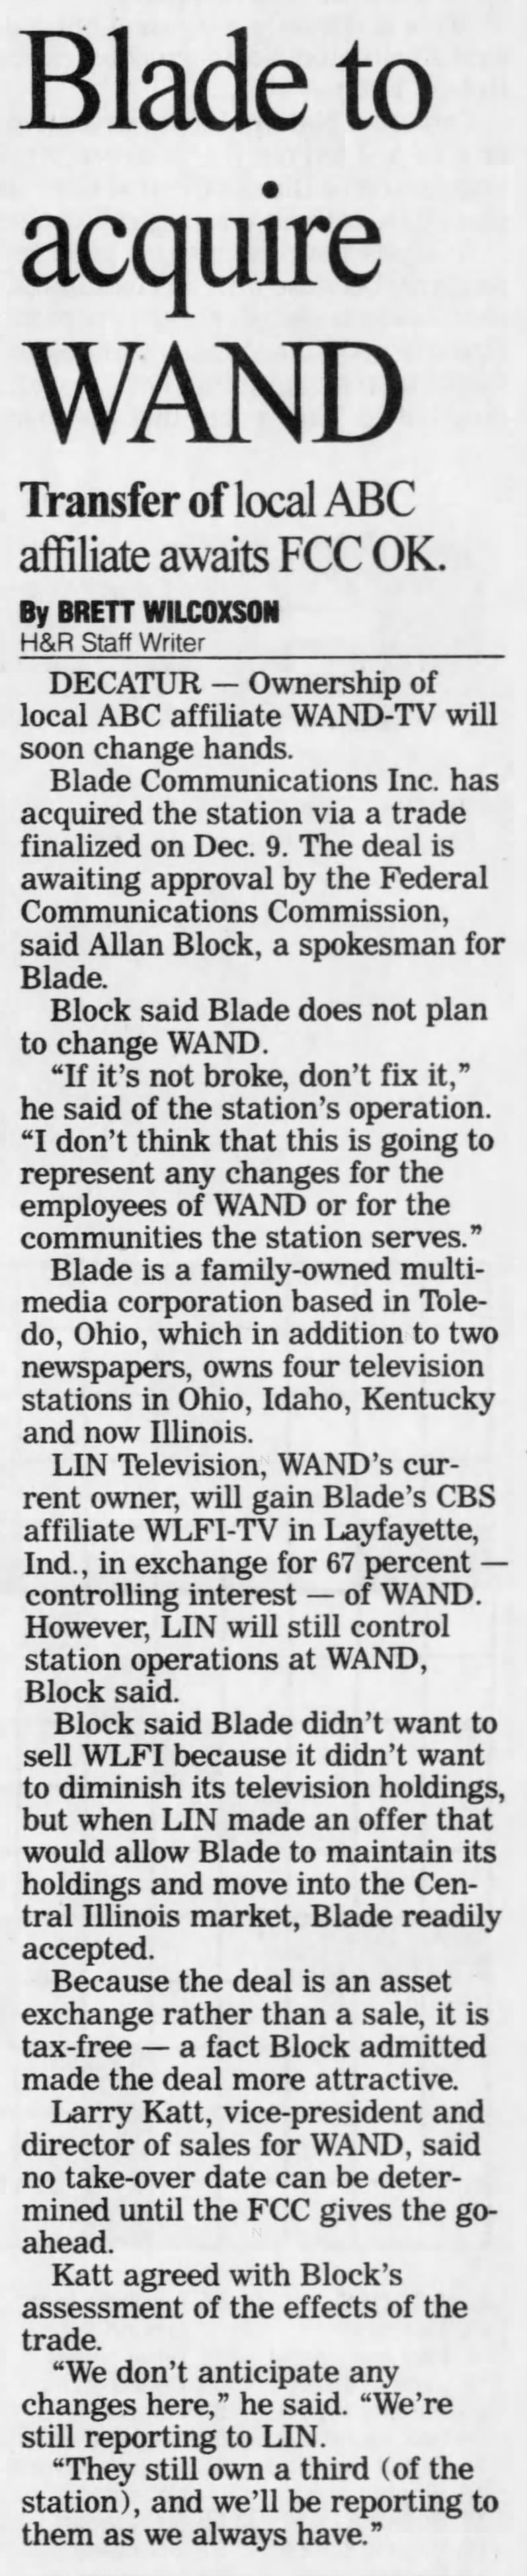 Blade to acquire WAND: Transfer of local ABC affiliate awaits FCC OK